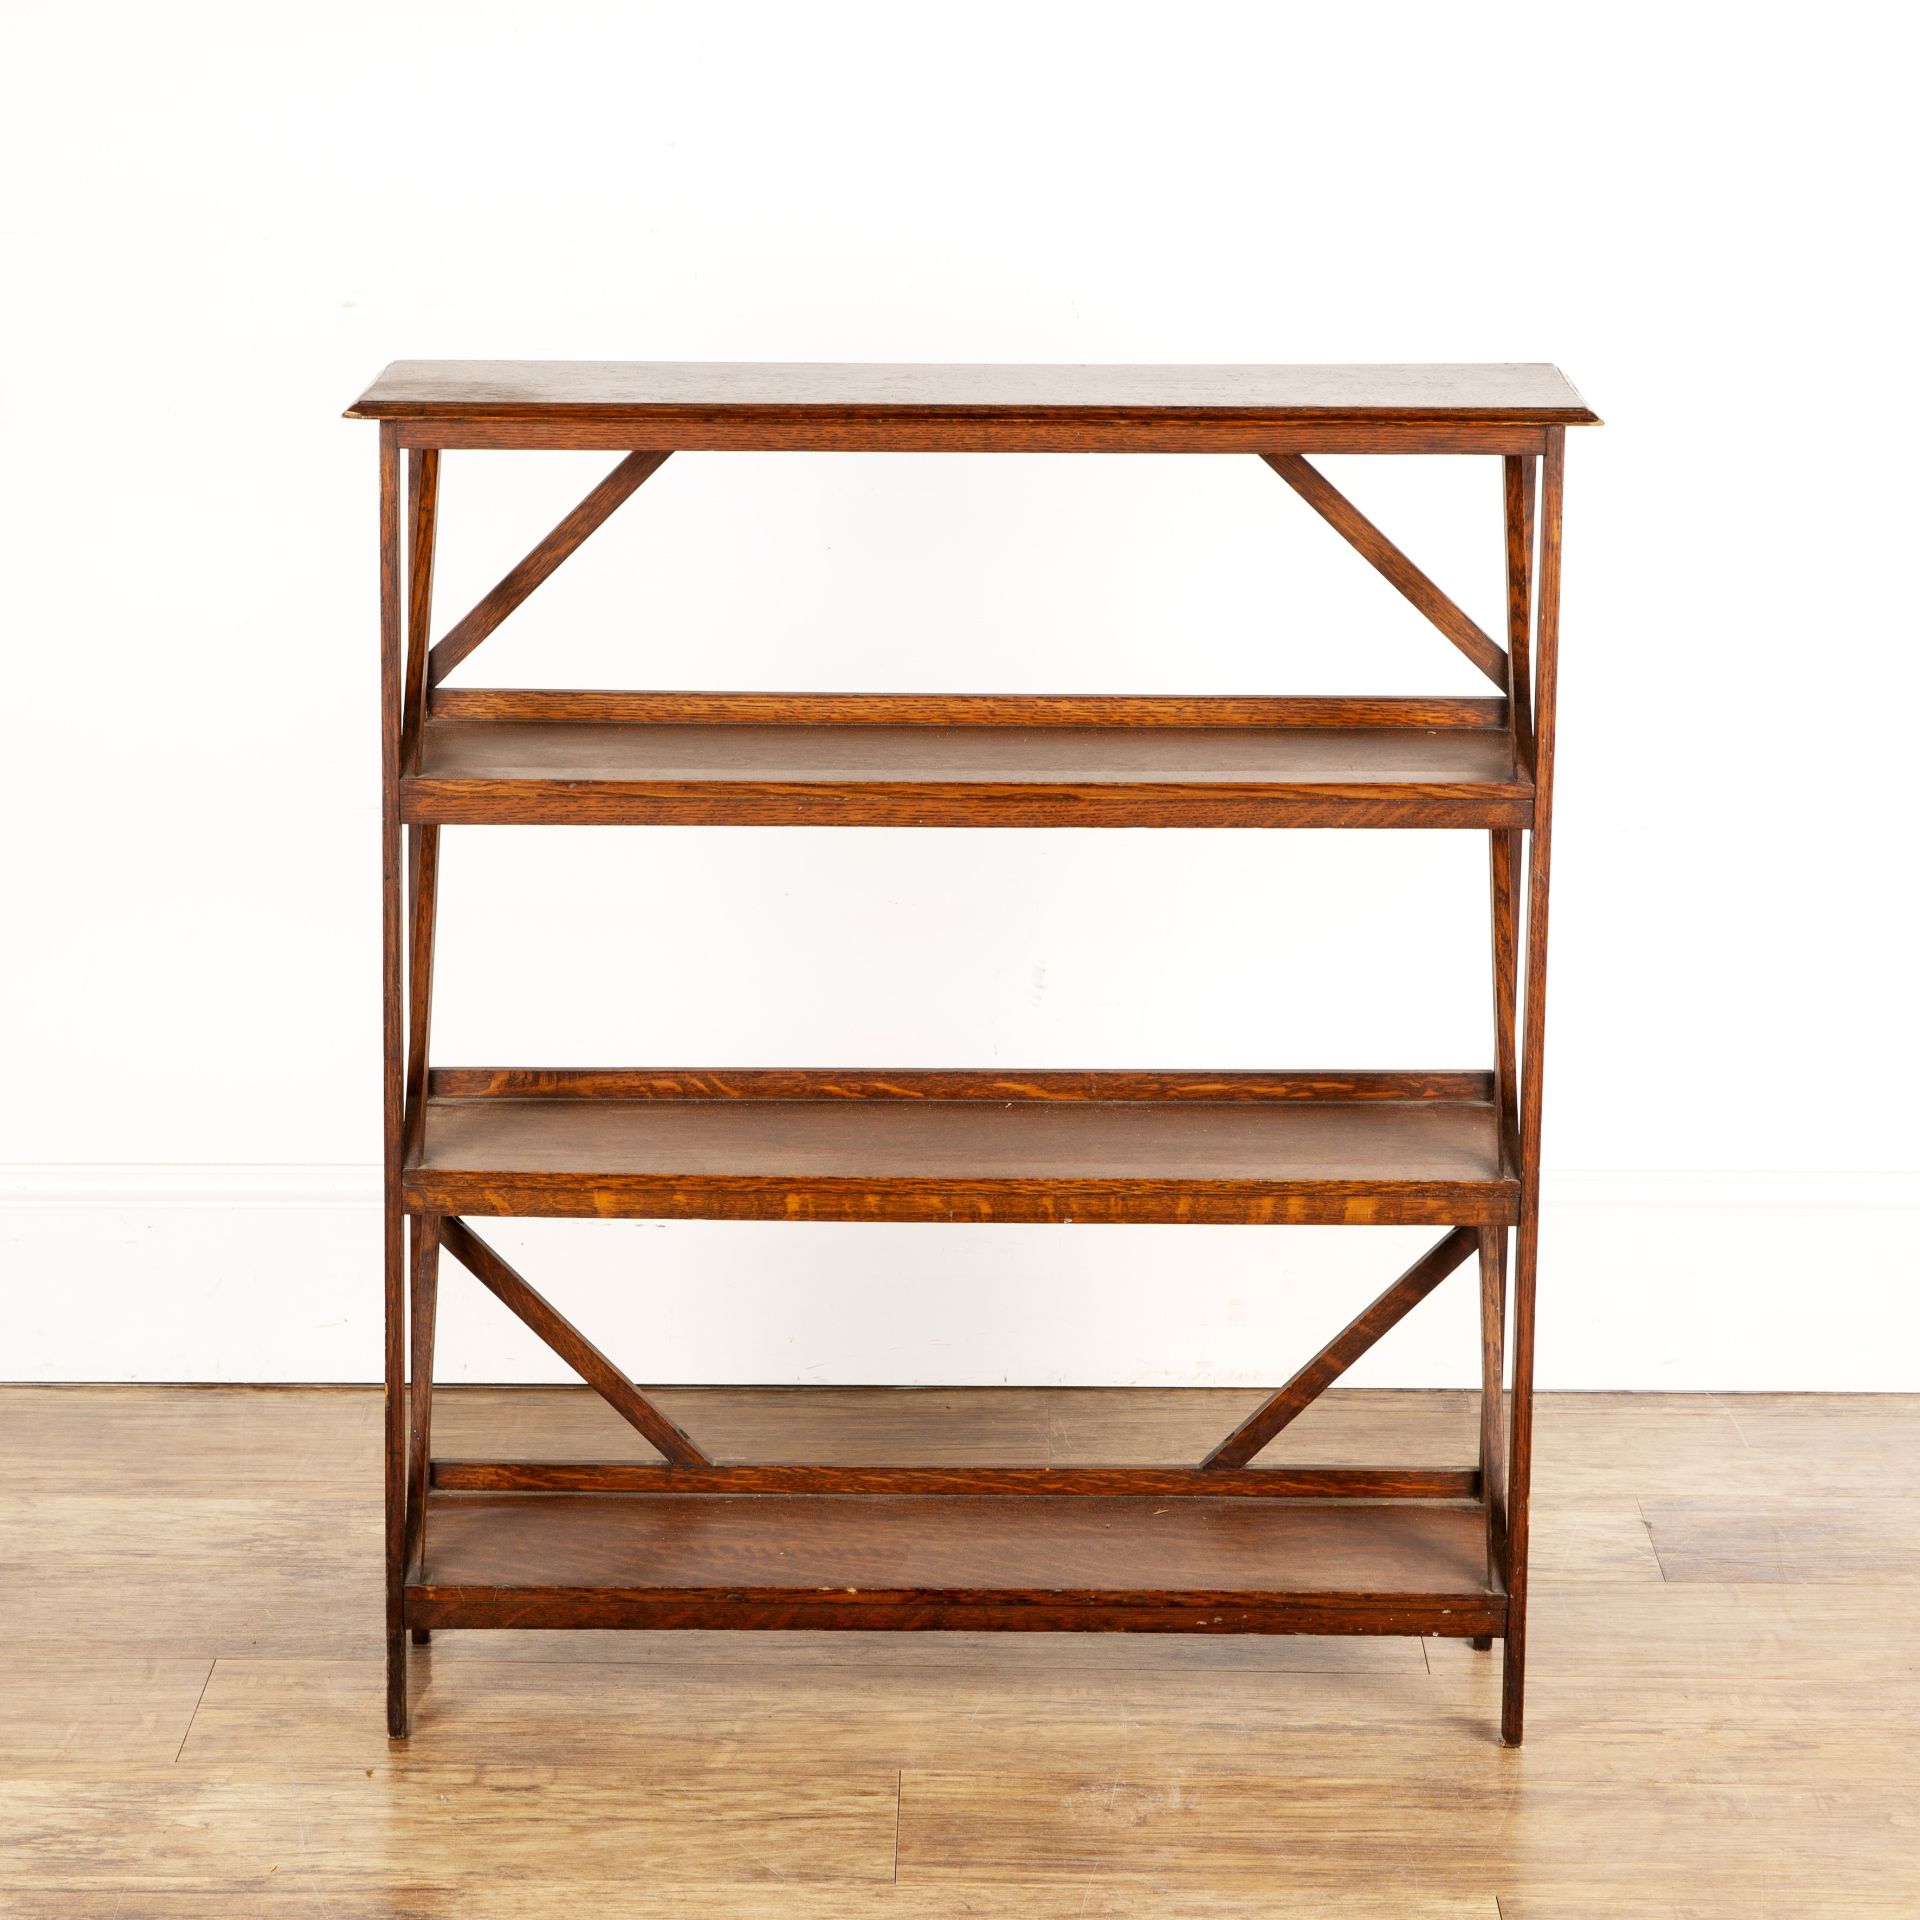 In the manner of Heals oak, open bookcase, with diagonal supports, 76cm wide x 86cm high x 20.5cm